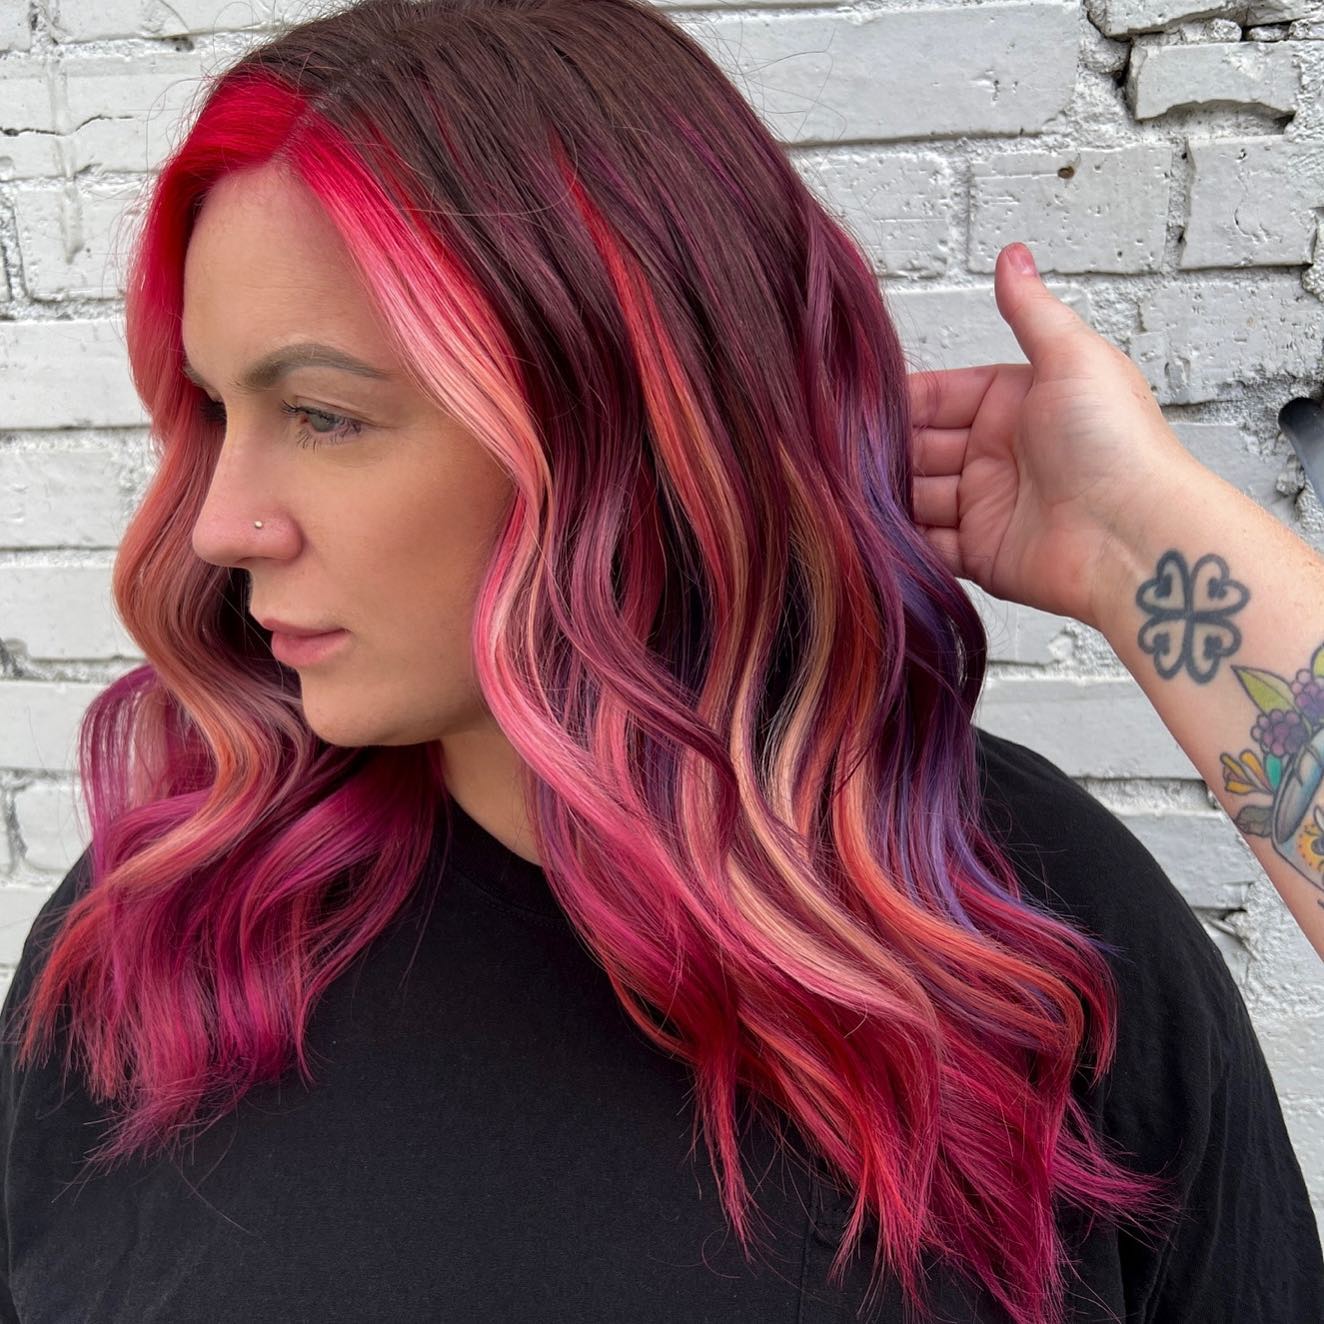 100+ Best Colorful Hair Ideas images 40